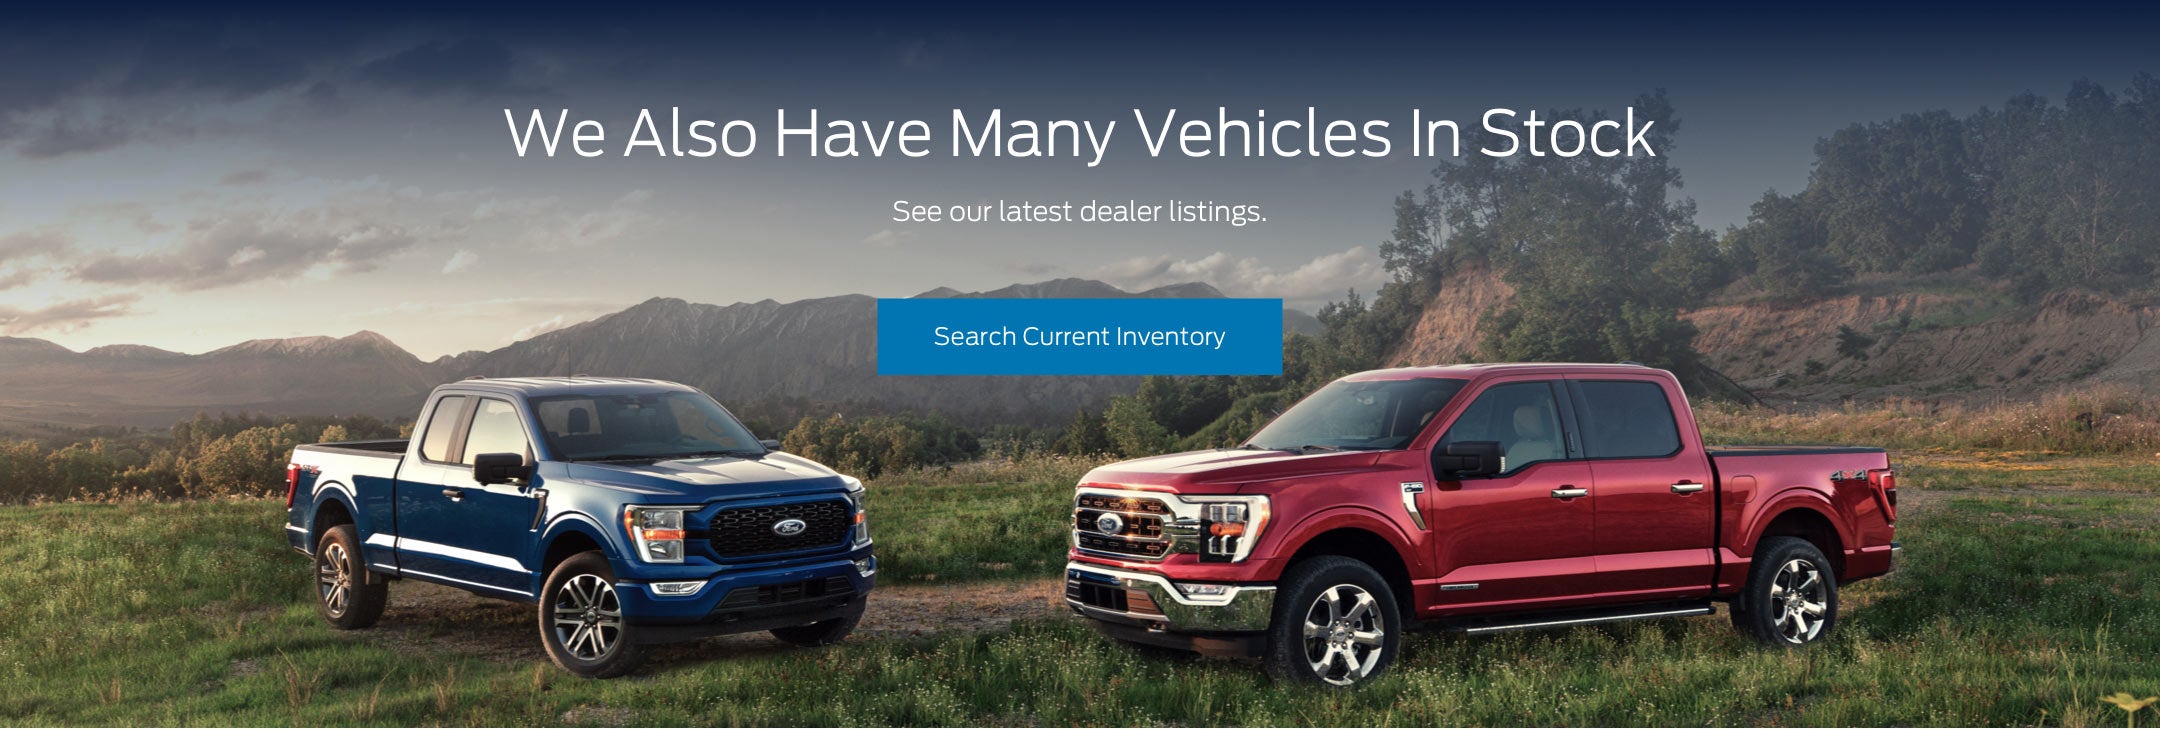 Ford vehicles in stock | Griffin Ford Fort Atkinson in Fort Atkinson WI